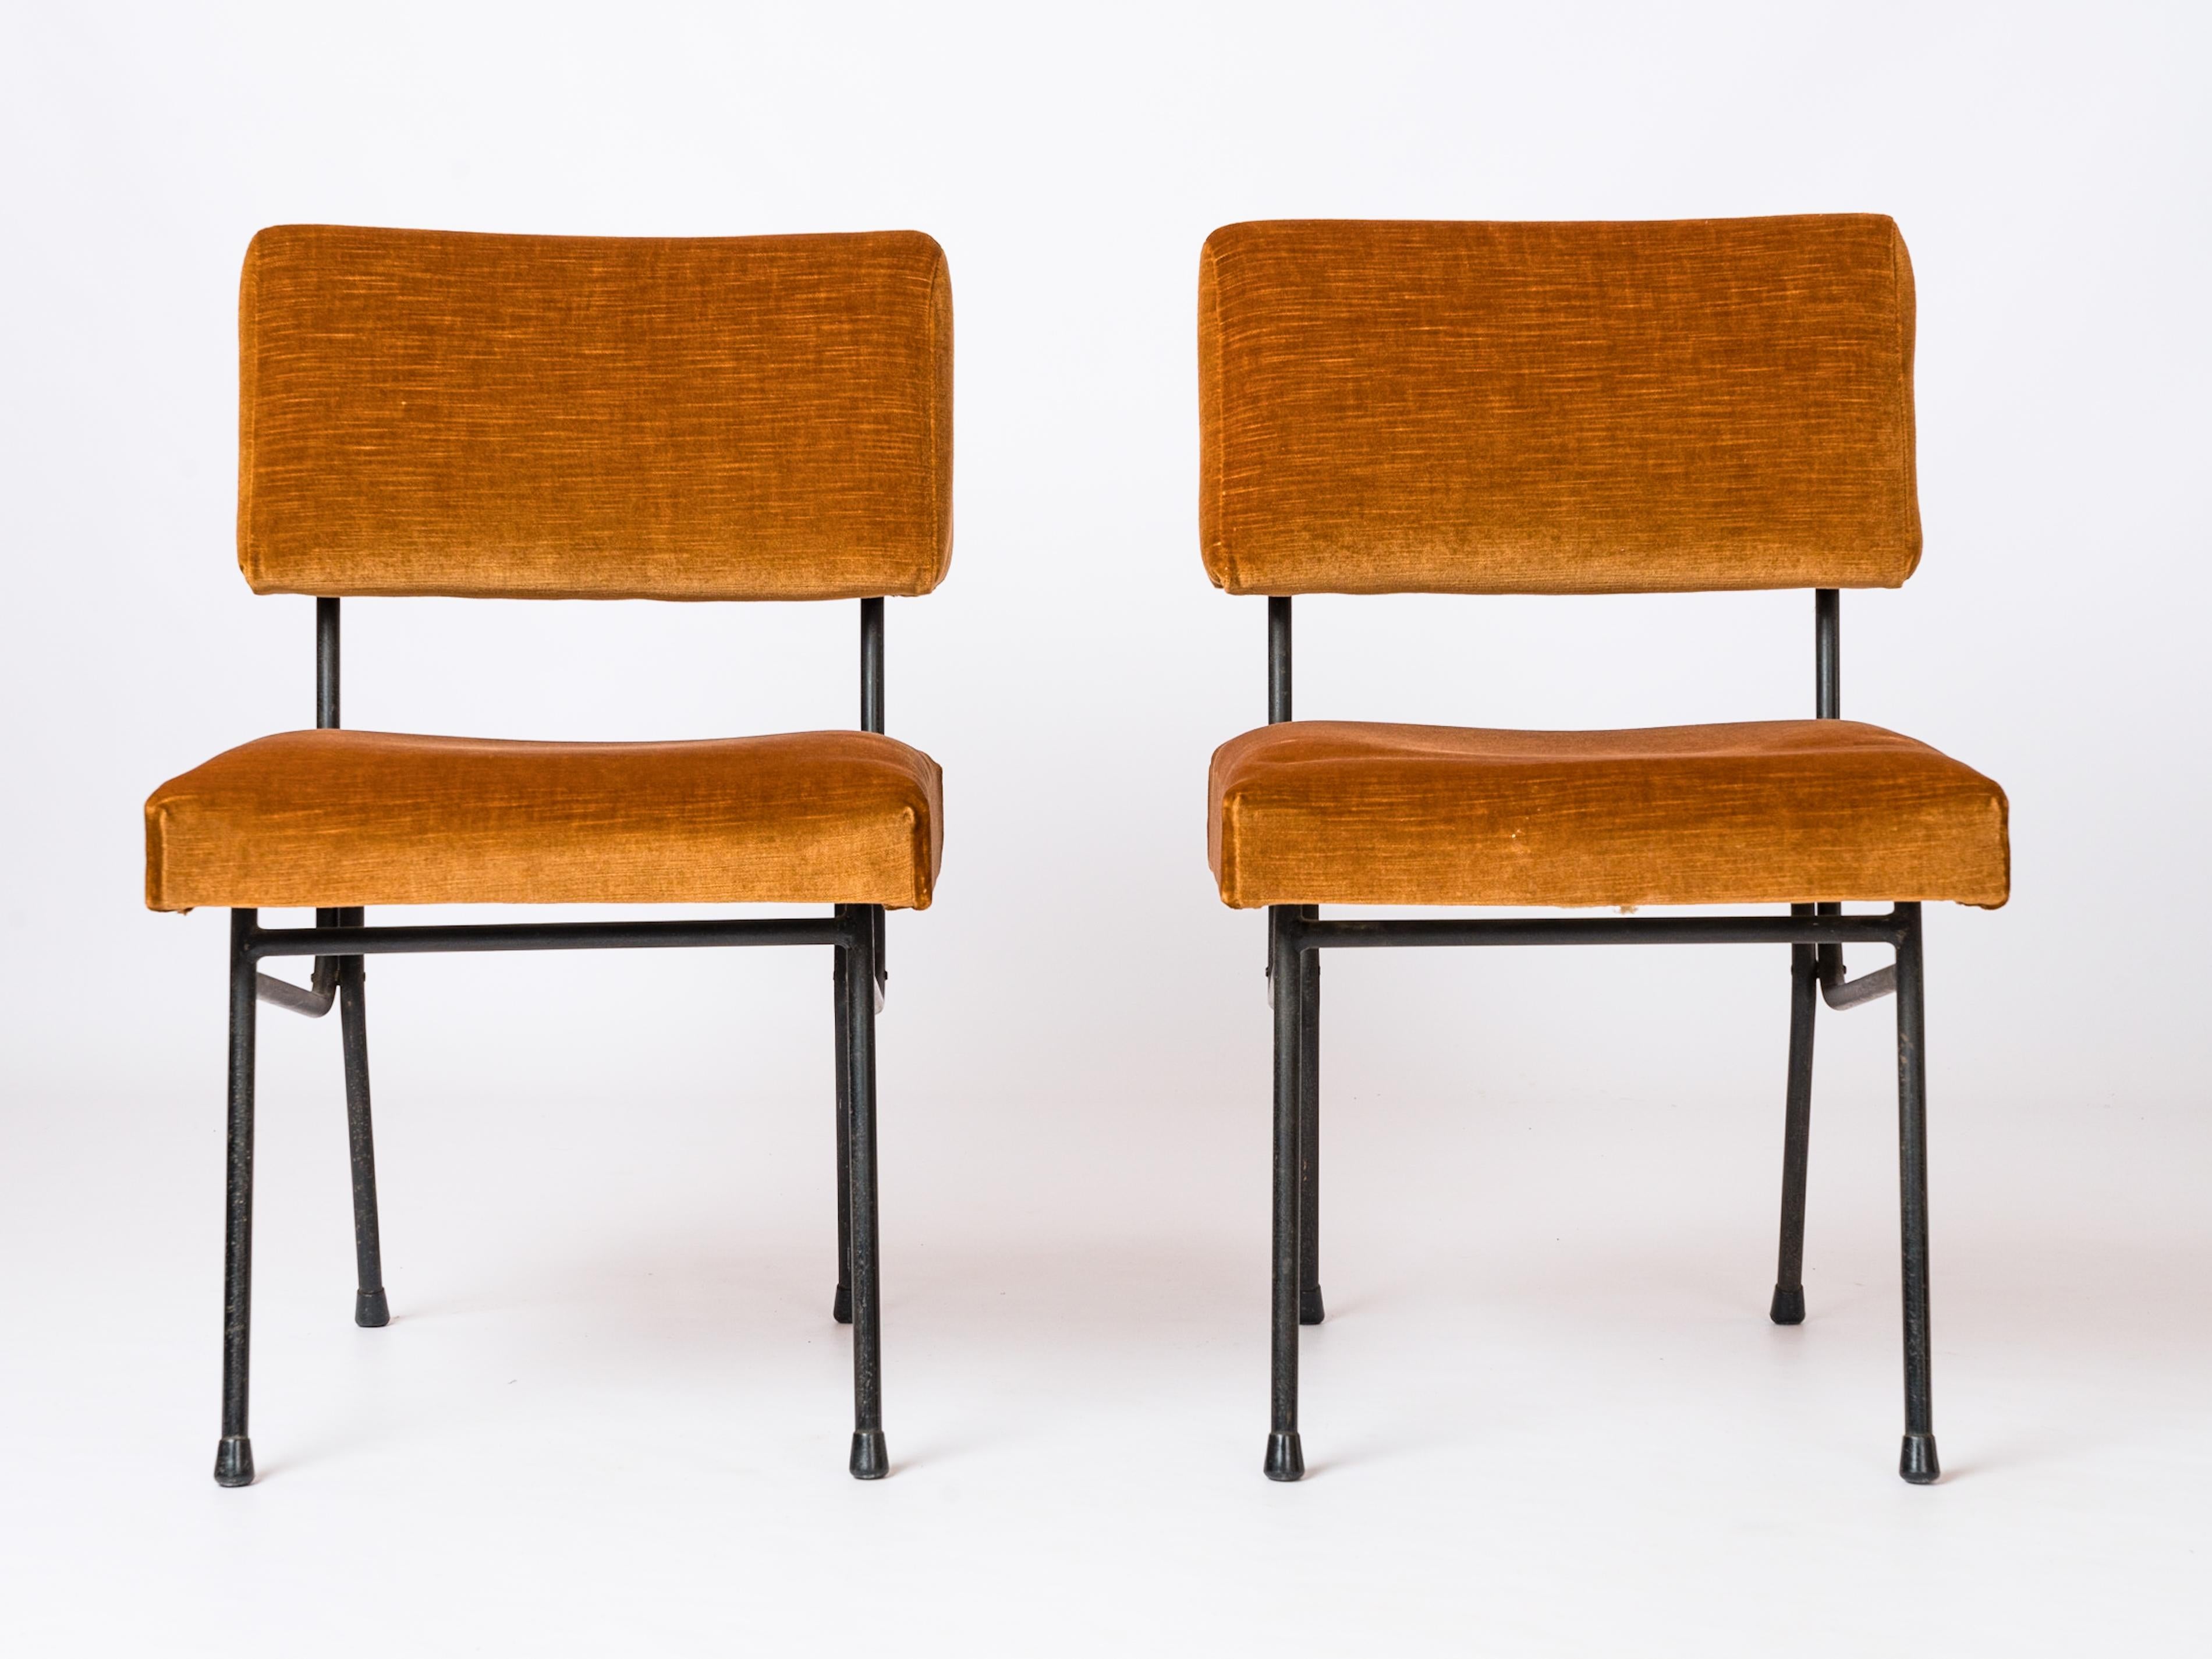 Pair of minimalist adjustable chairs featuring a black lacquered steel structure and original marigold upholstery. As shown on picture 6, the chairs are adjustable for depth, height and seat height and can be switched to a more loungy position.
COM